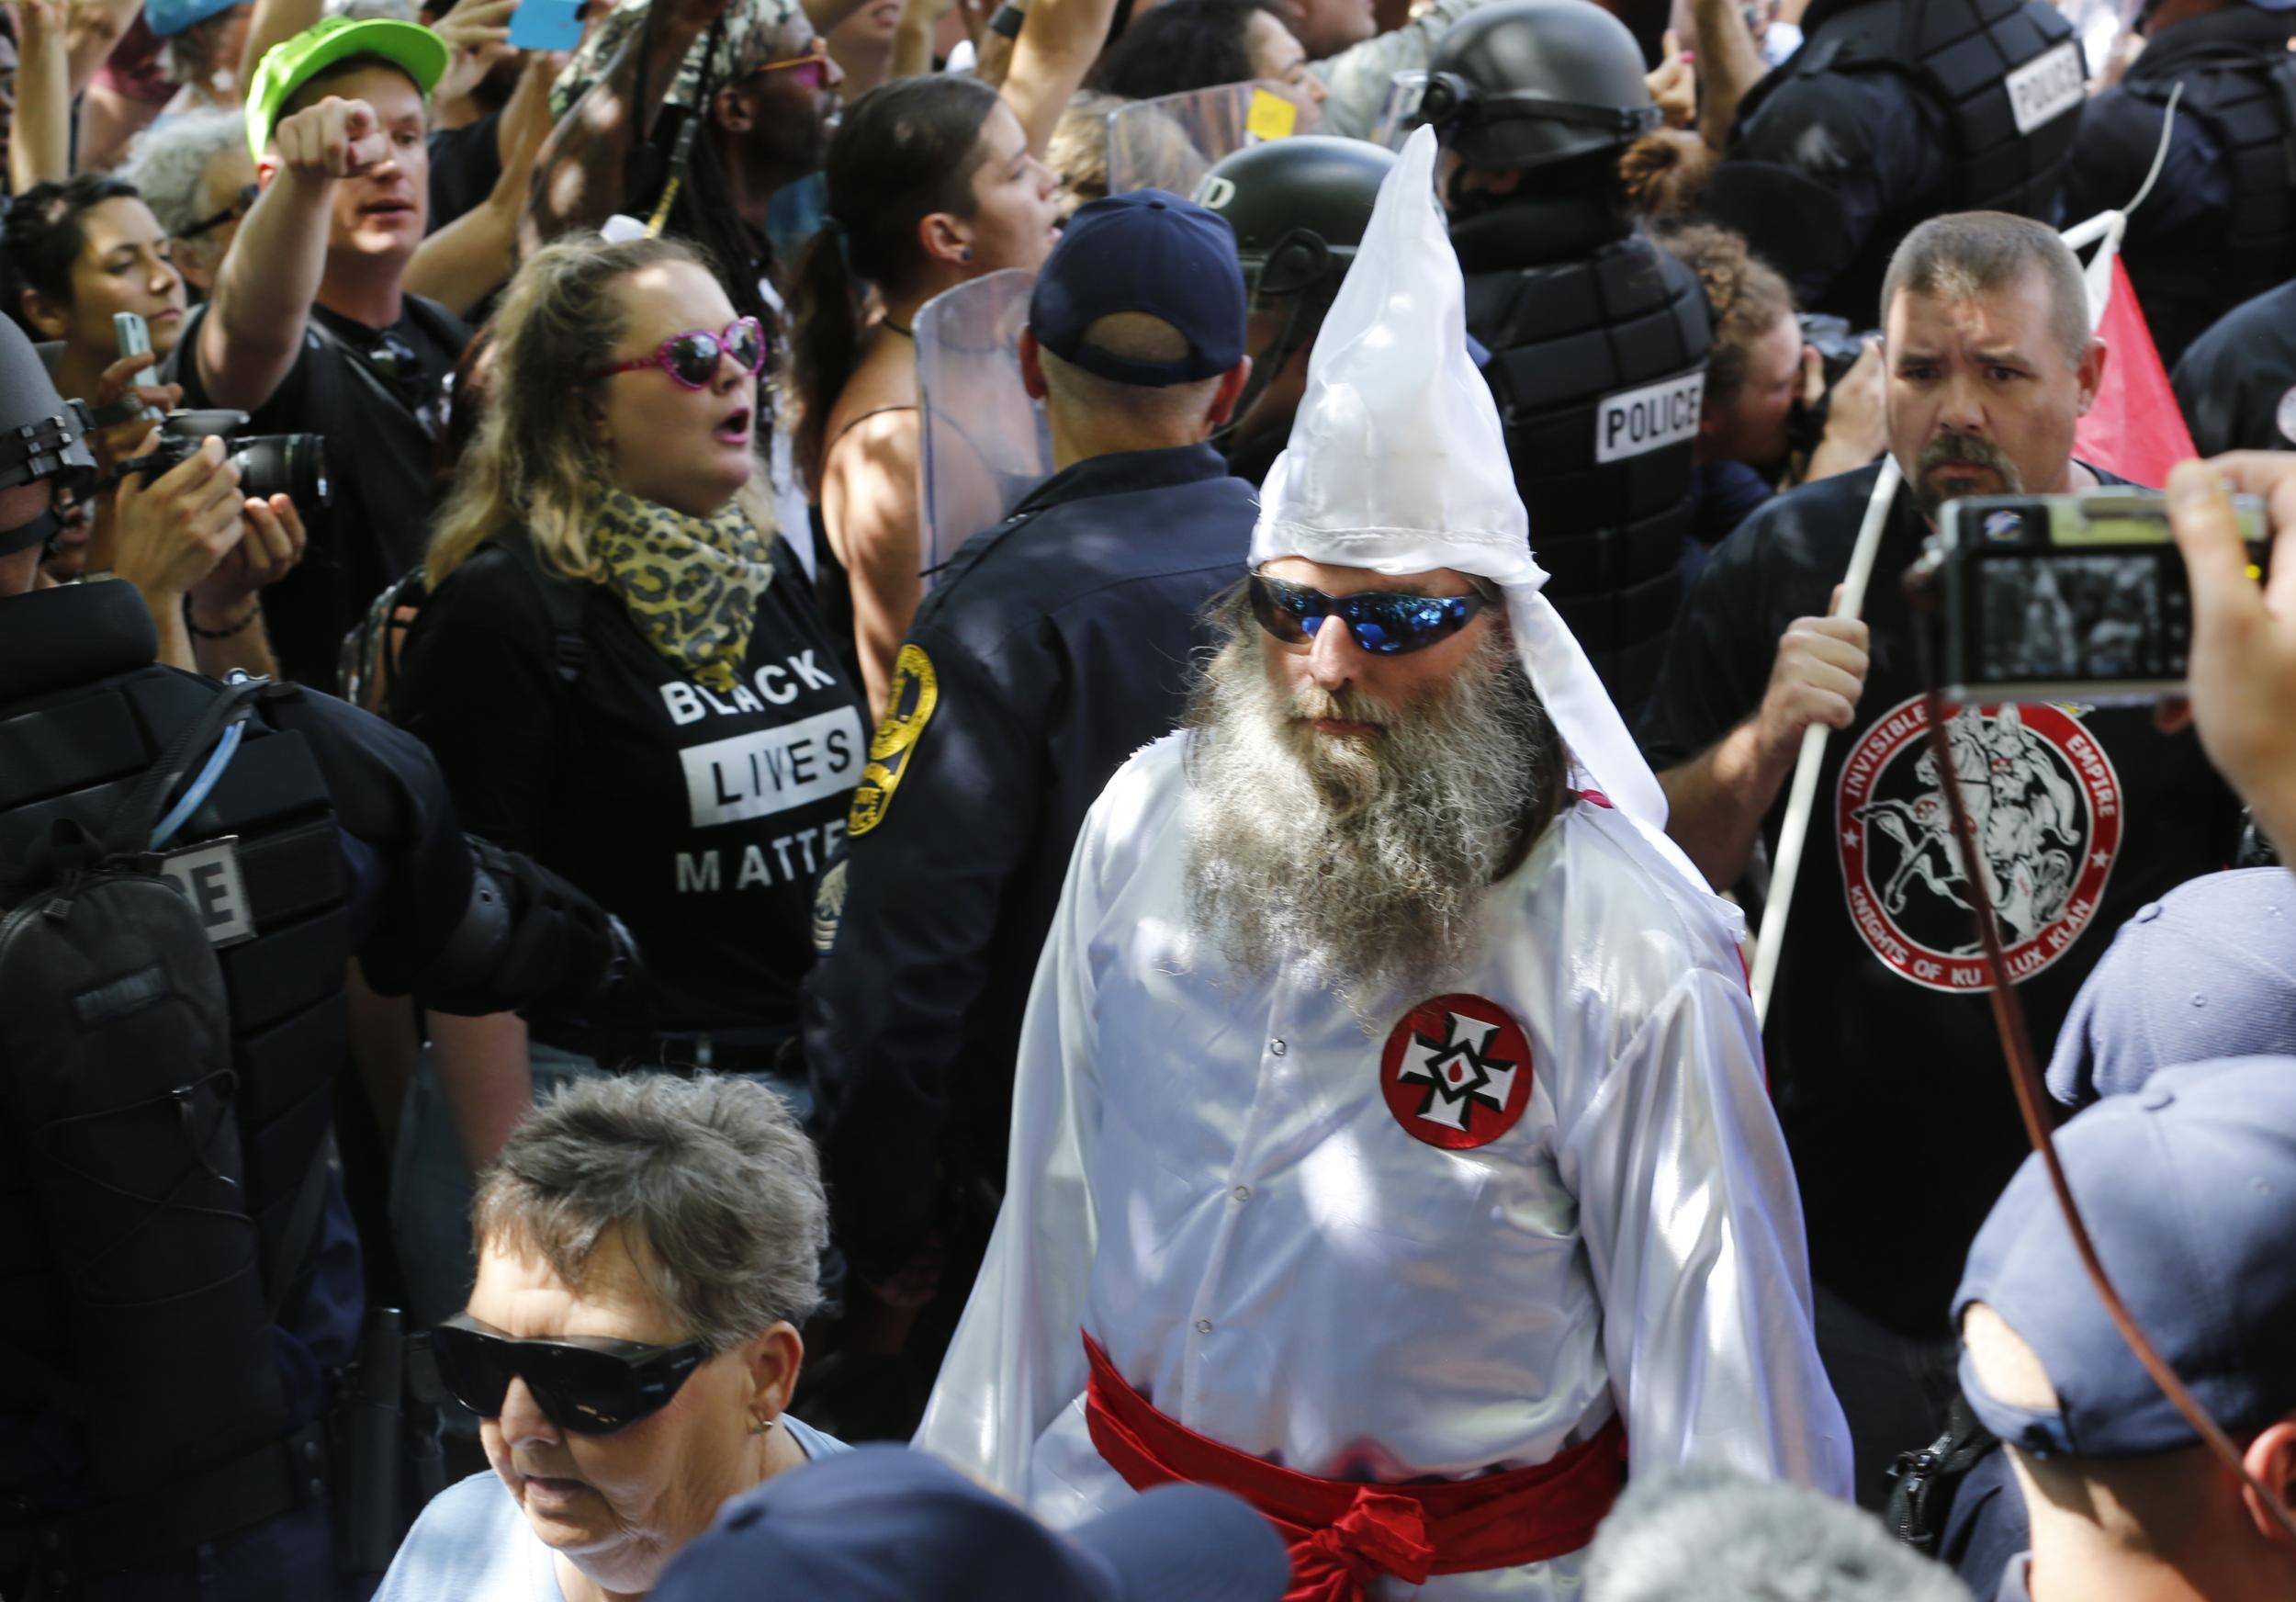 Members of the KKK are escorted by police past a large group of protesters during a KKK rally in Charlottesville